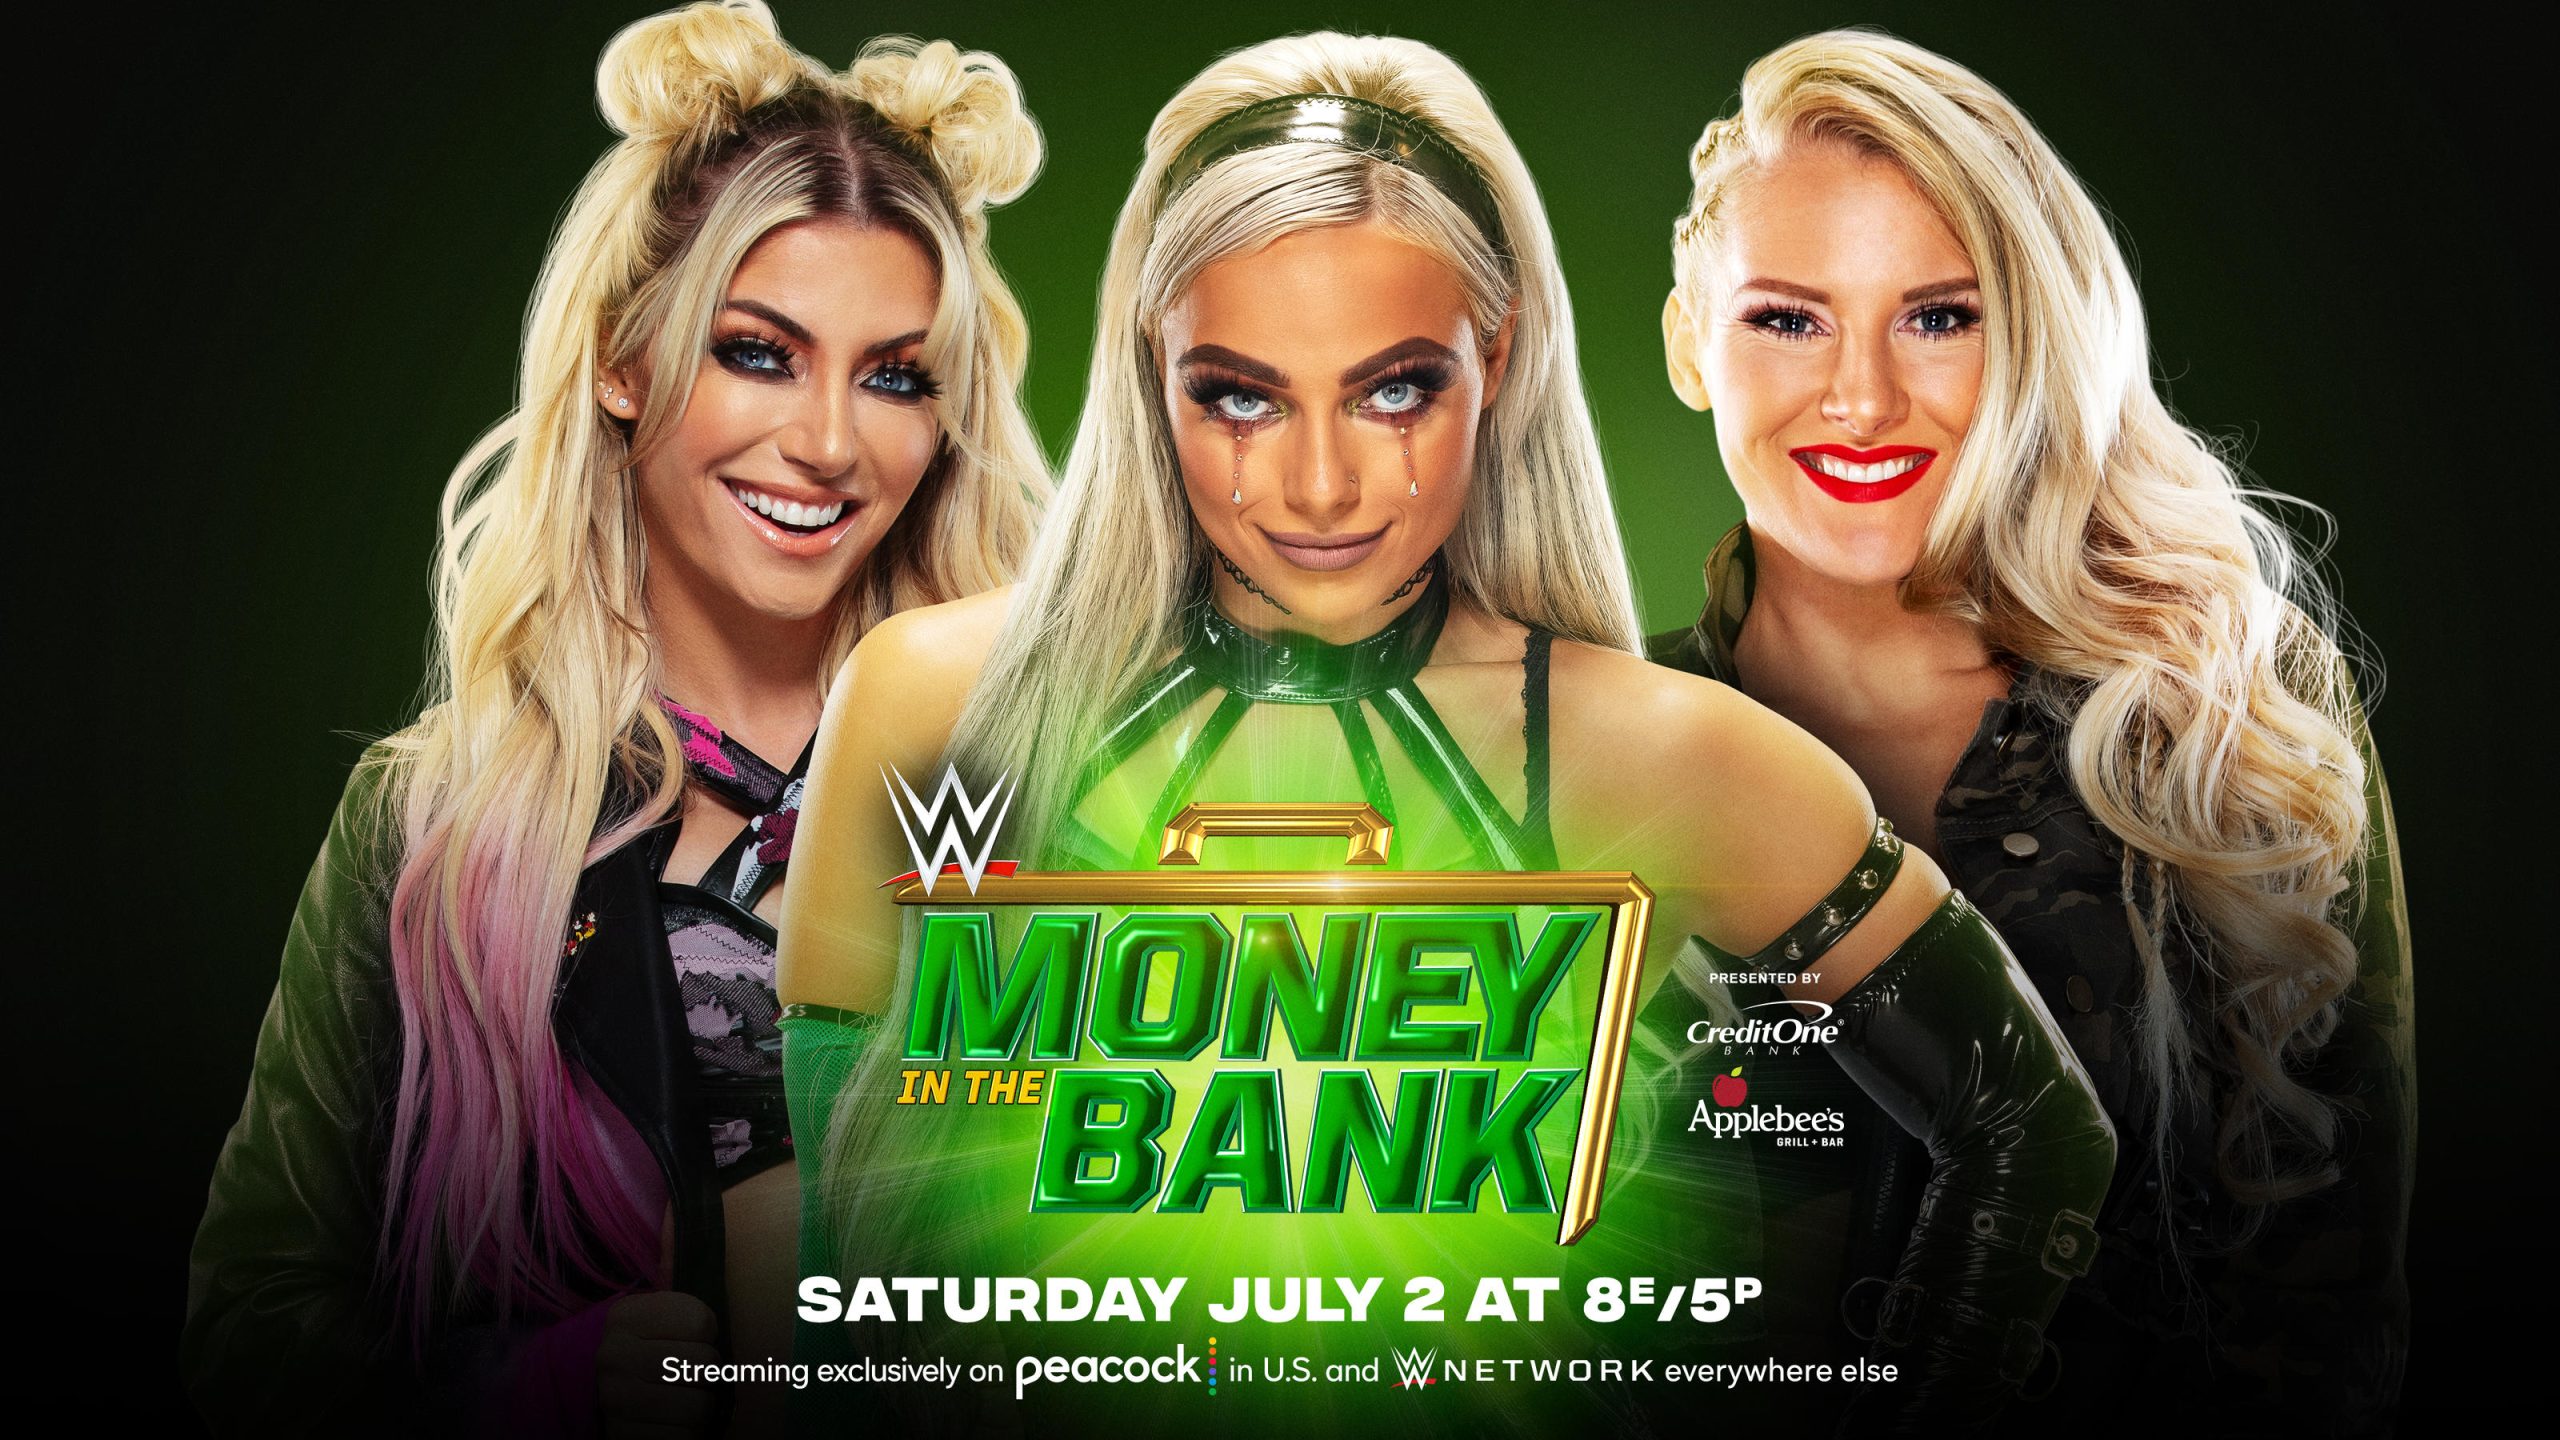 Alexa Bliss, Liv Morgan and Lacey Evans will compete in the 2022 Money in the Bank Ladder Match